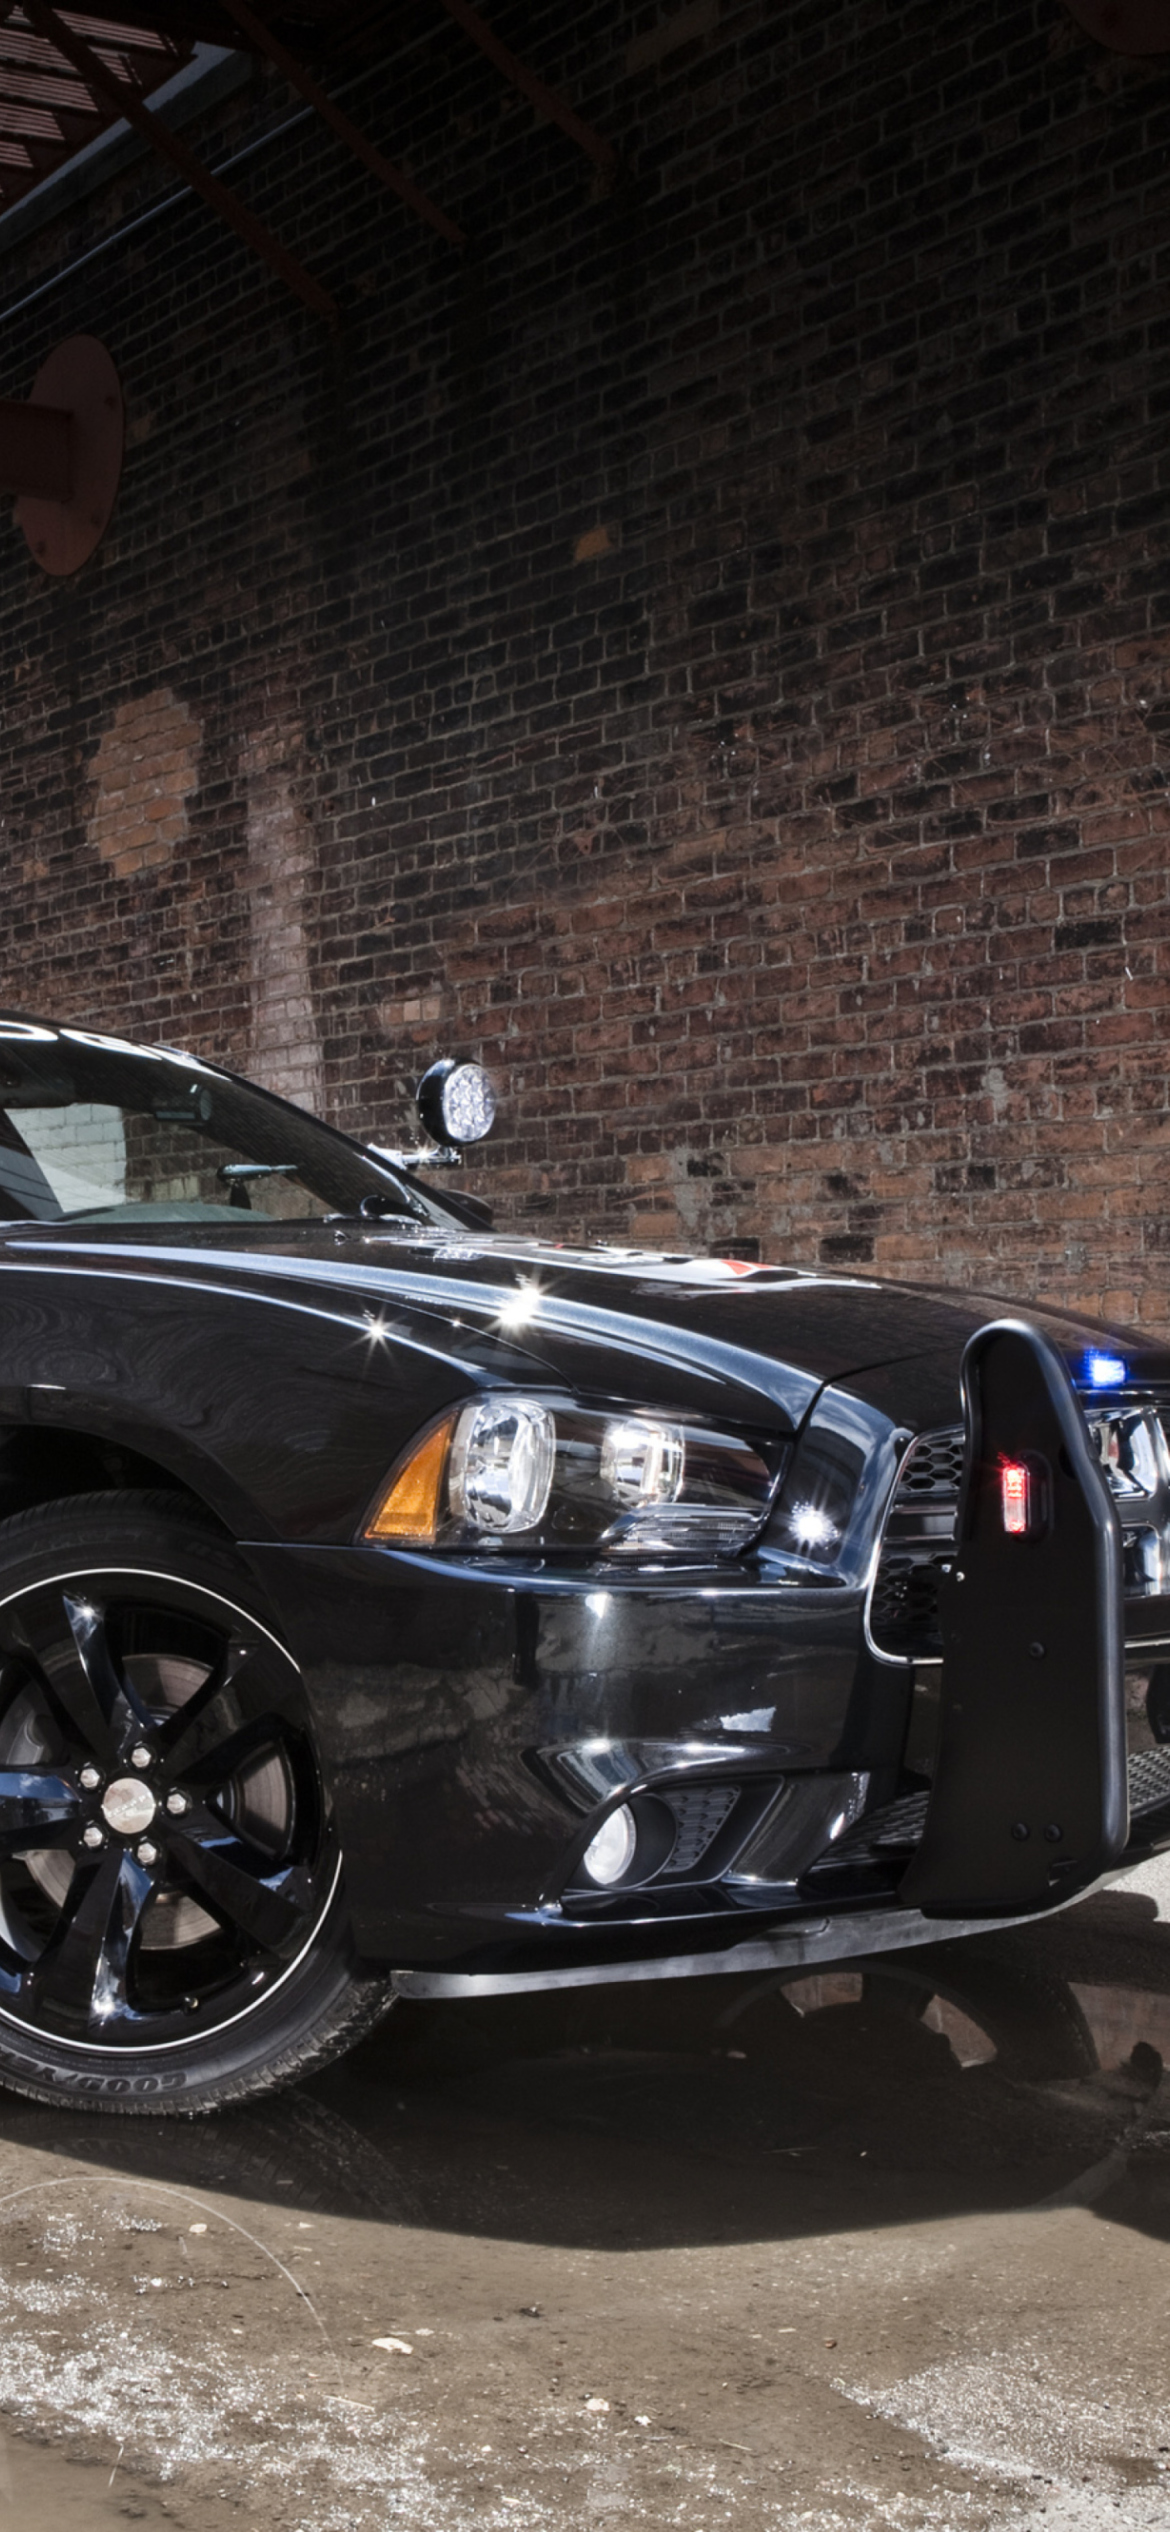 Dodge Charger - Police Car wallpaper 1170x2532